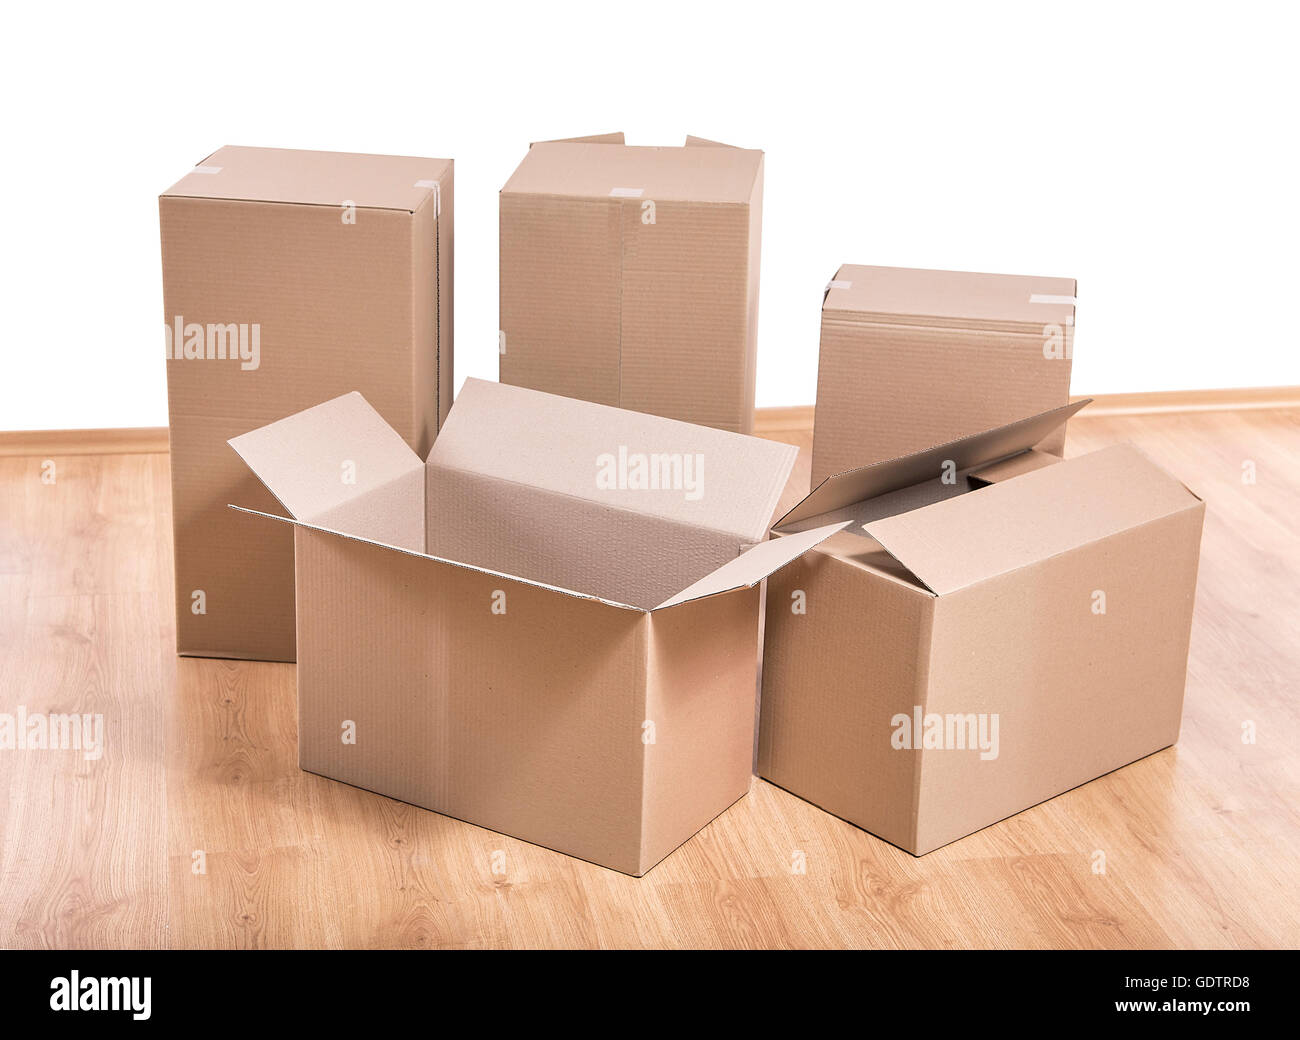 Empty room with a white wall and moving boxes on the floor. Stock Photo